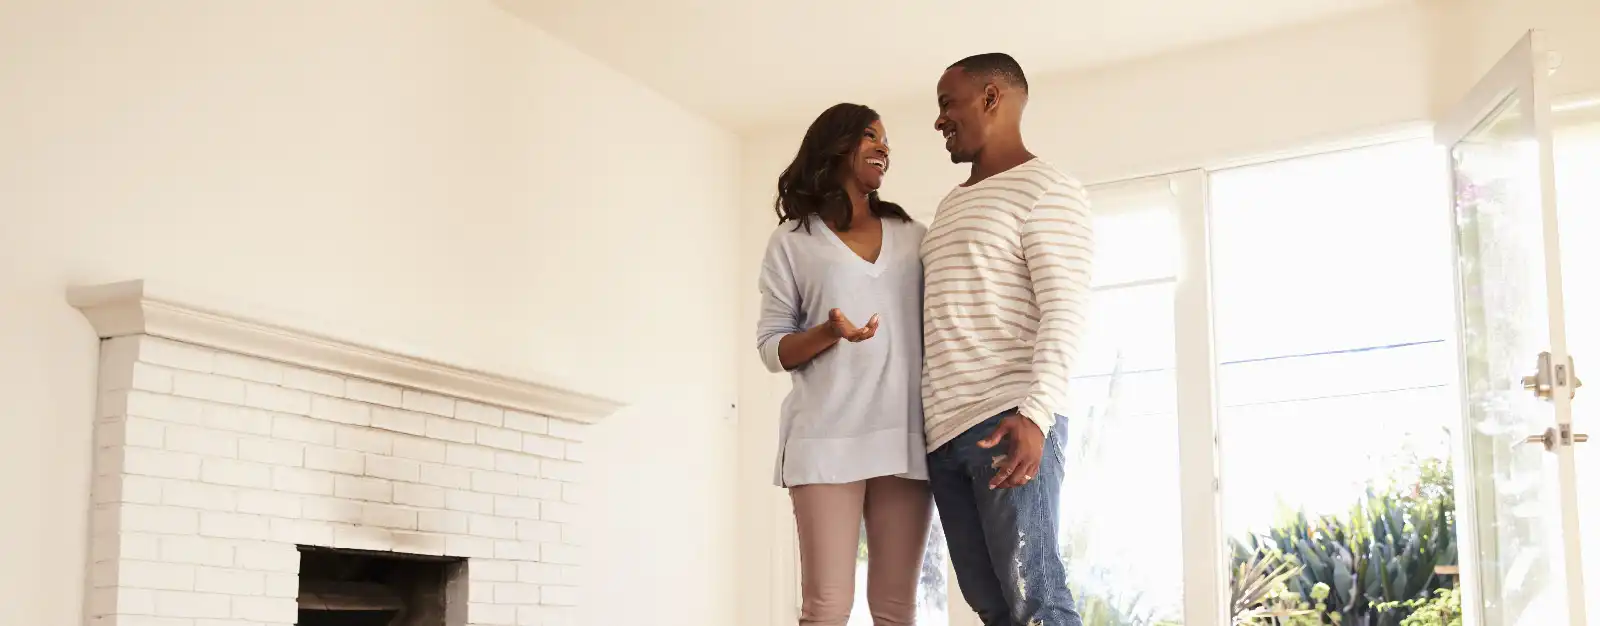 Man and woman hugging and smiling in new living room